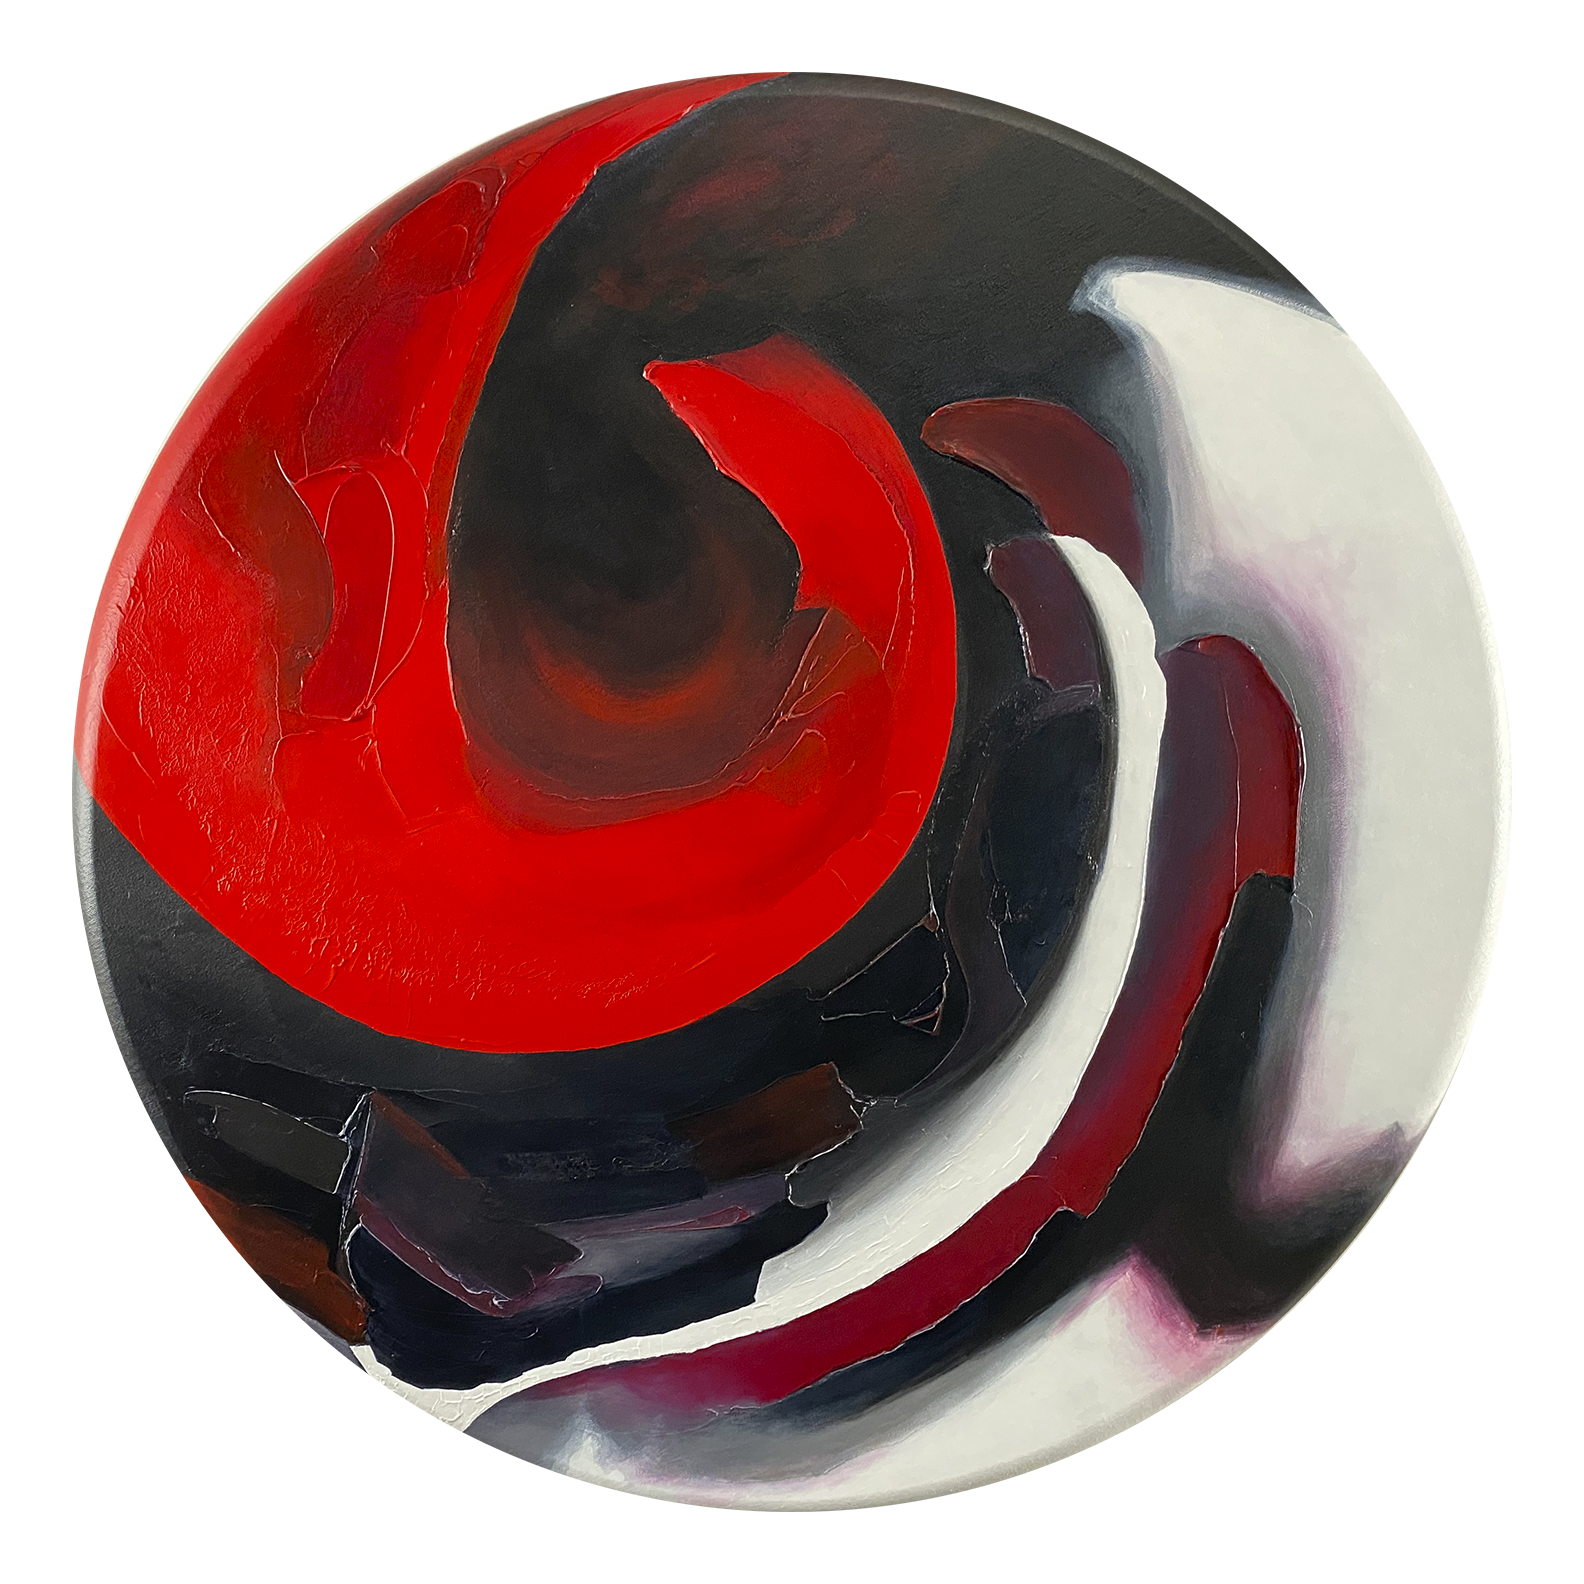 Full view of the abstract acrylic and mixed-media painting: texture paste, red, black, grey, and white acrylic paint on round canvas with curved-edges